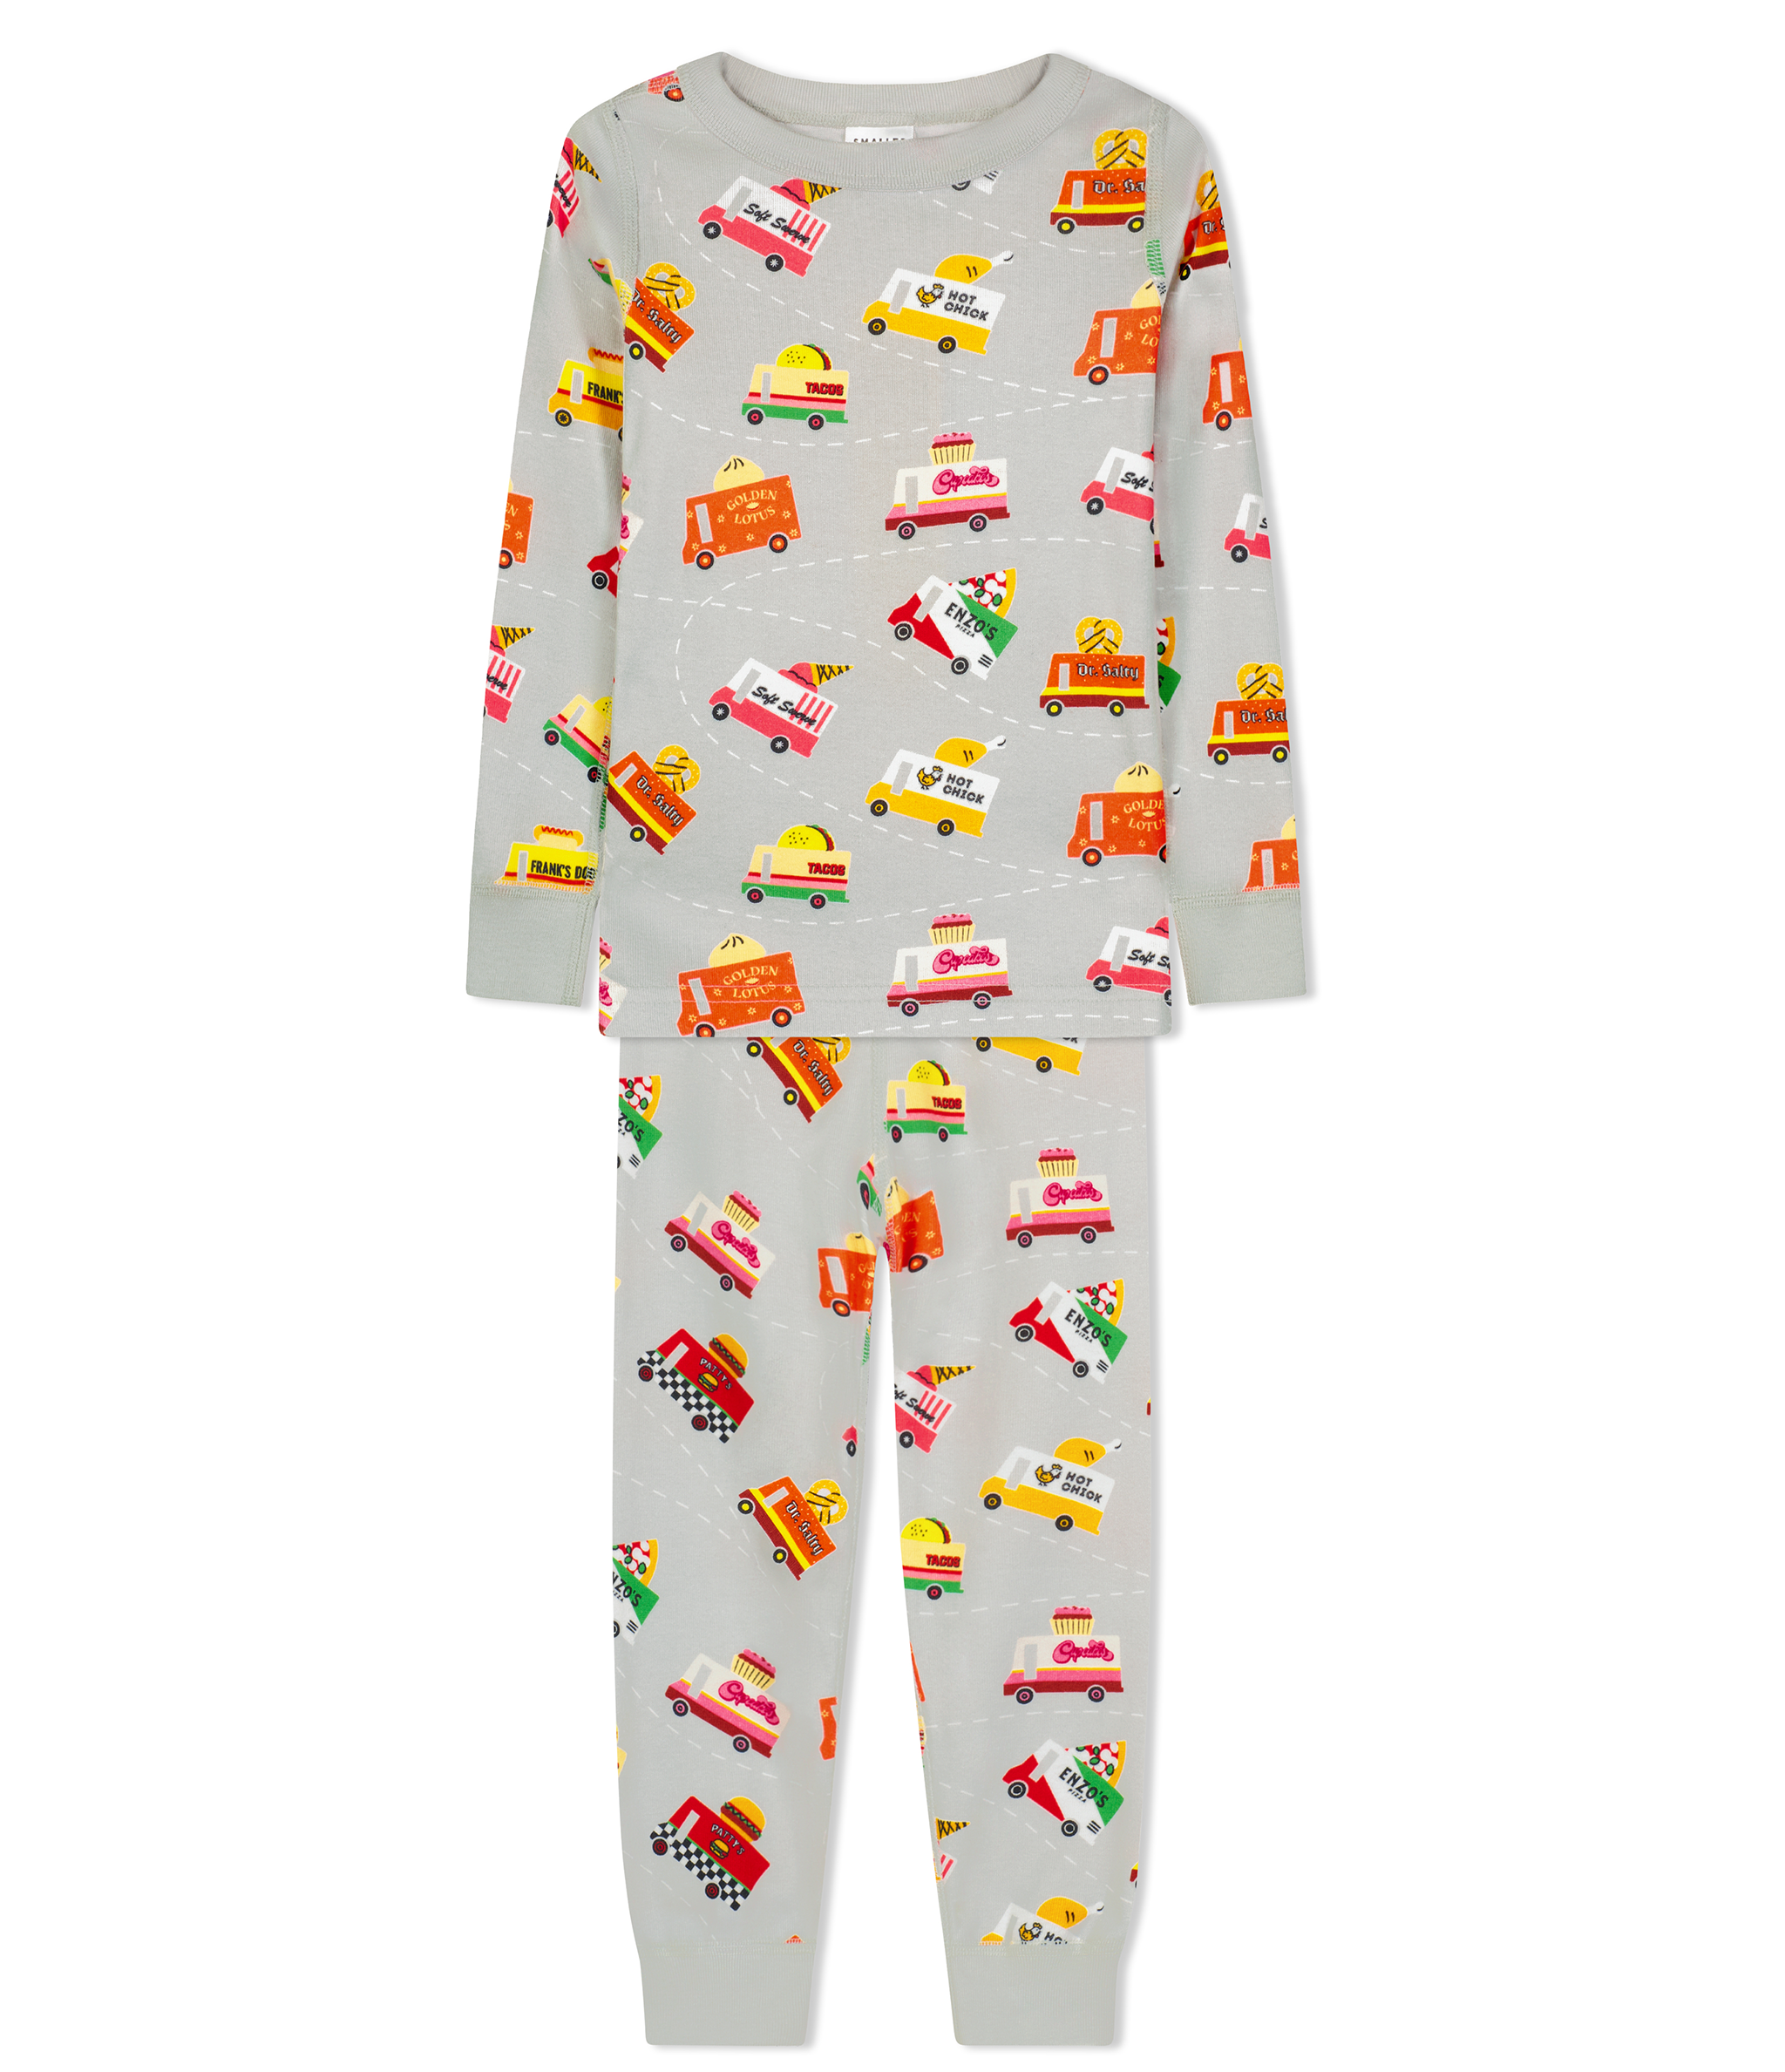 Smaller Things x Candylab Food Truck Pajamas 🍬